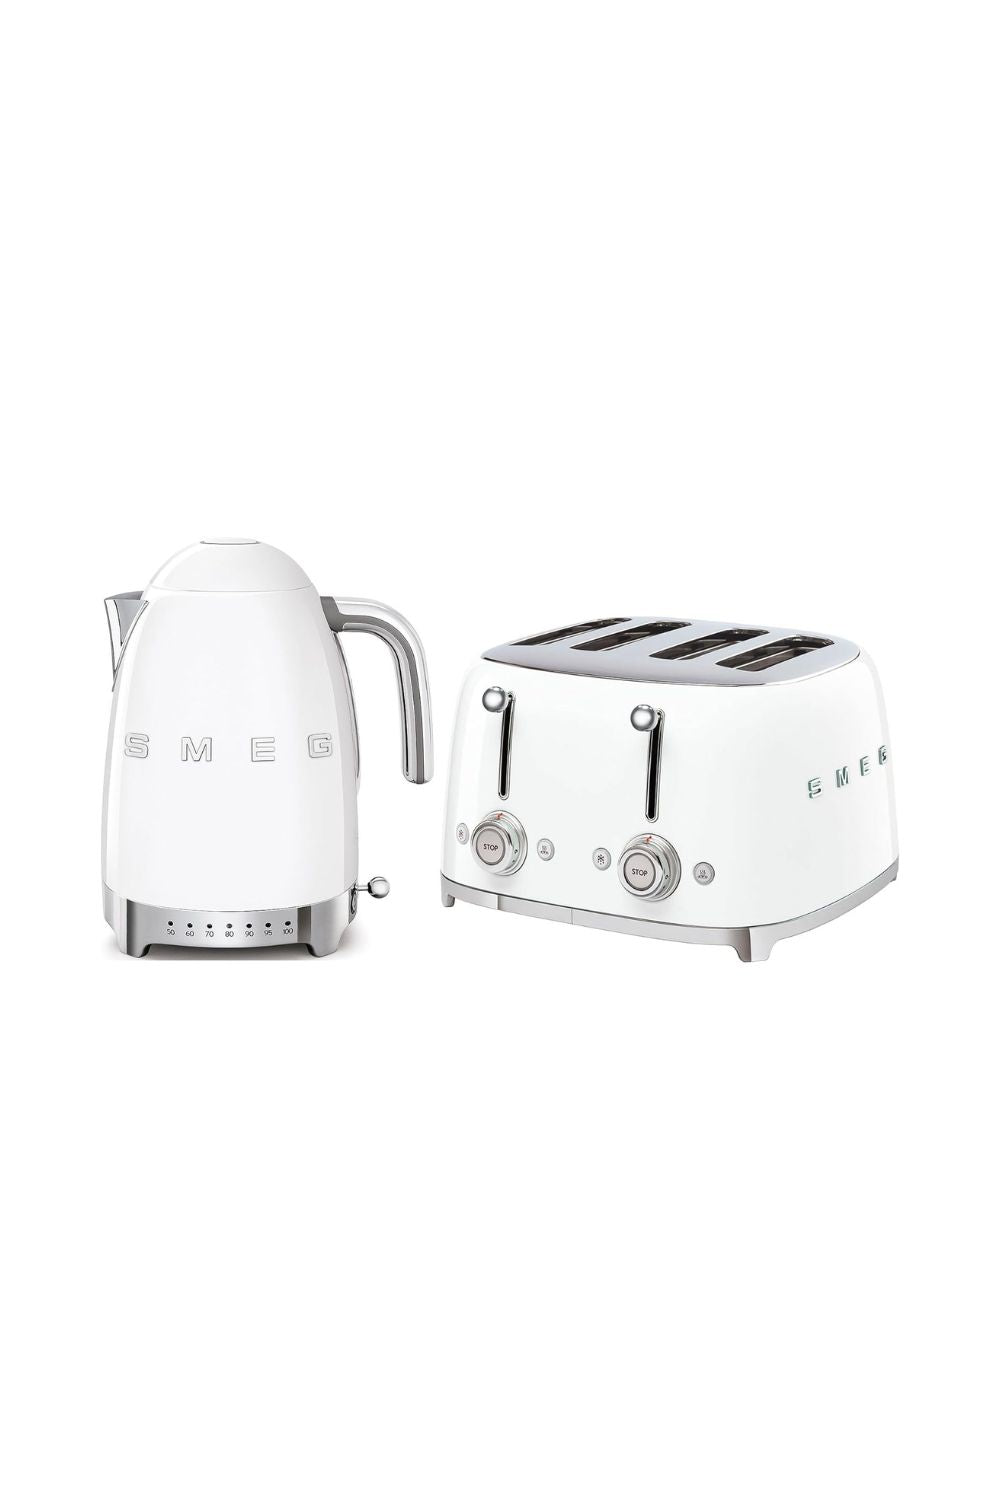 Smeg Bundle Set TSF03 4-Slice Toaster and KLF04 1.7L Variable Temperature Controlled Kettle - White from MagicVision